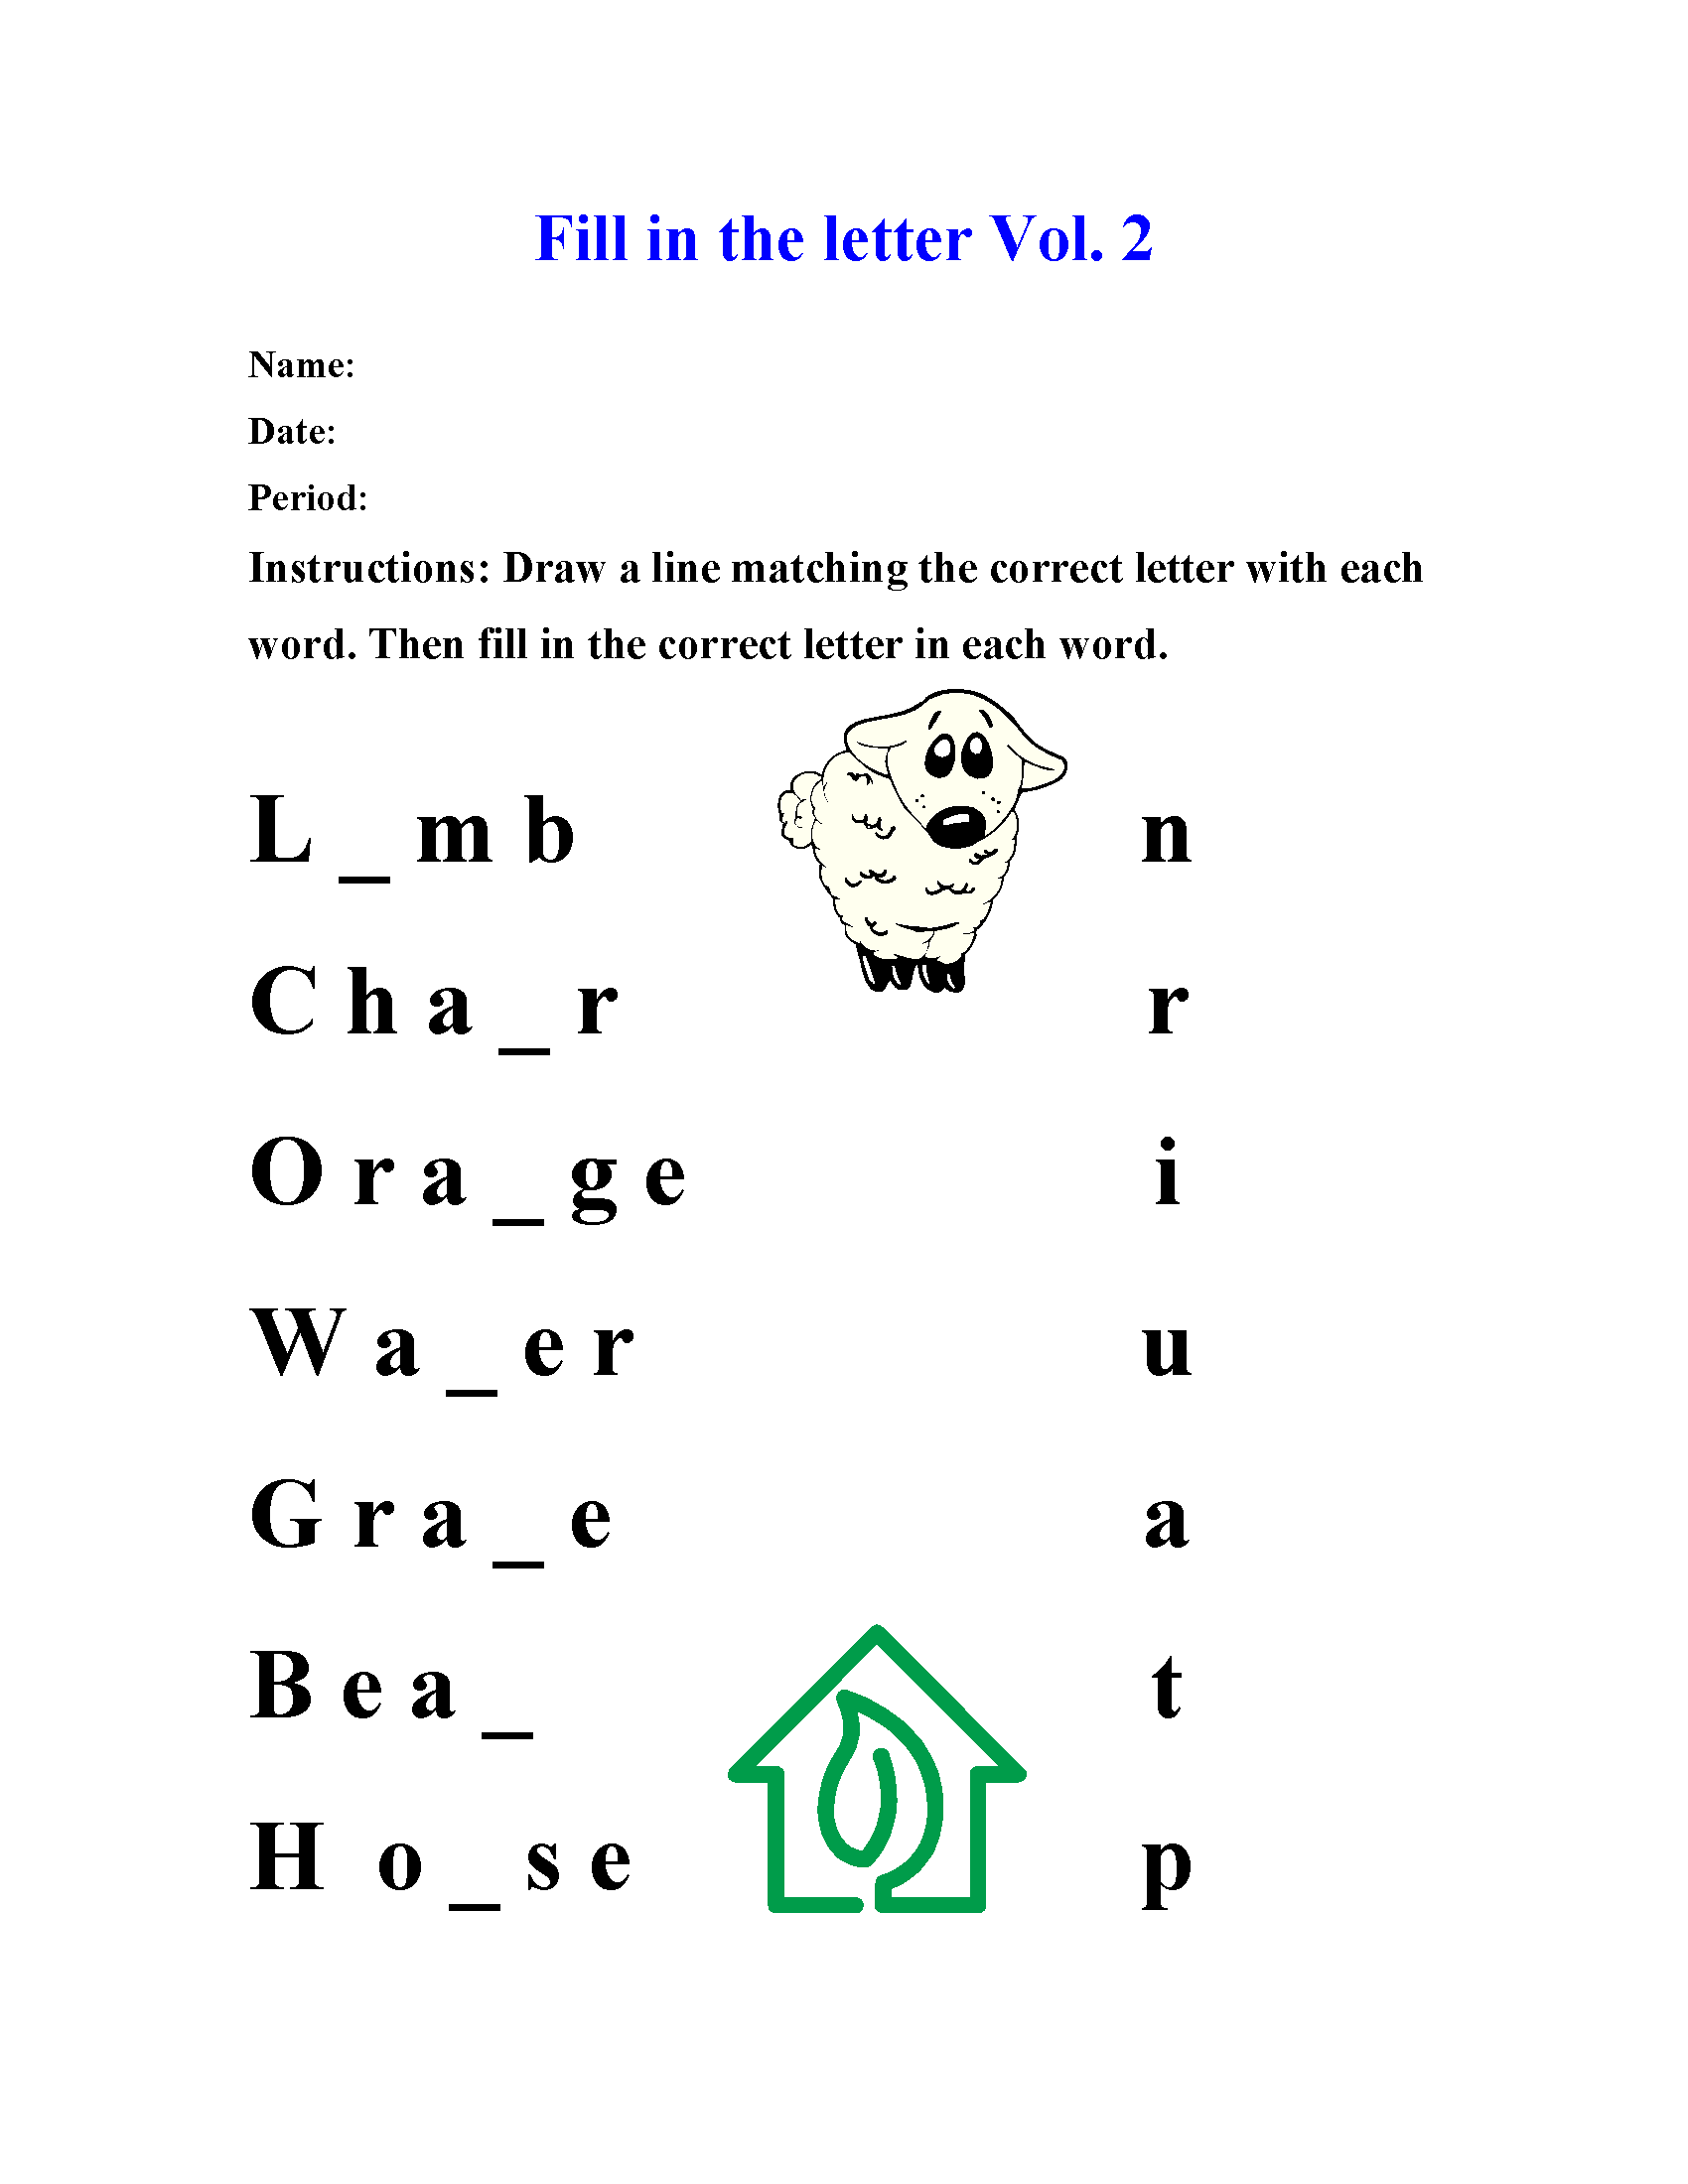 Fill in the letter Vol 2